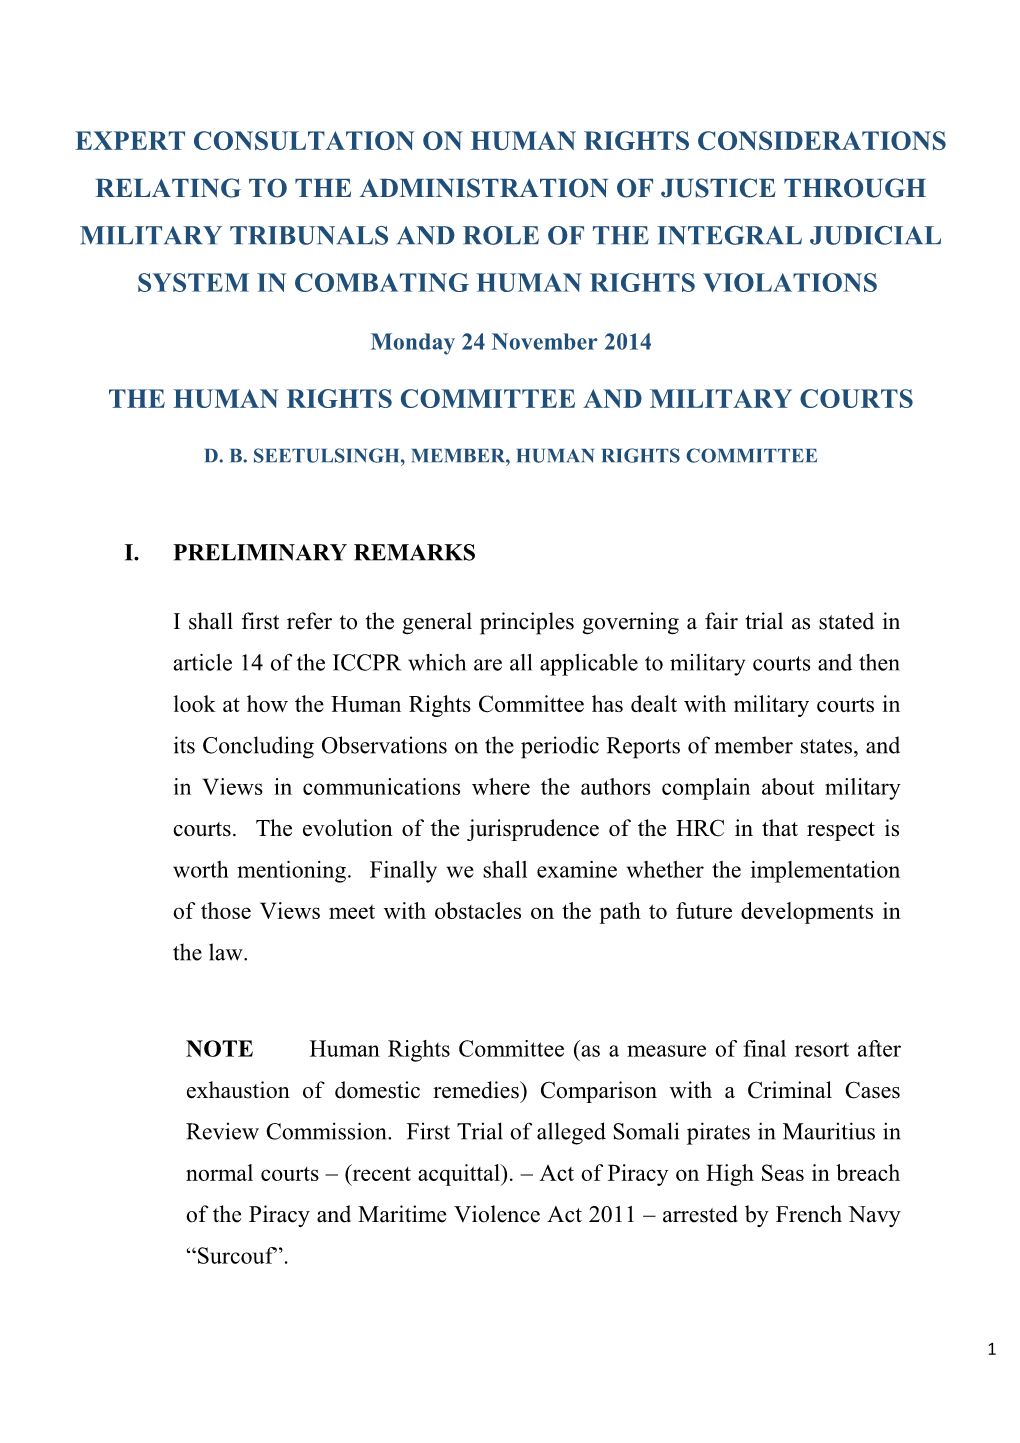 The Human Rights Committee and Military Courts